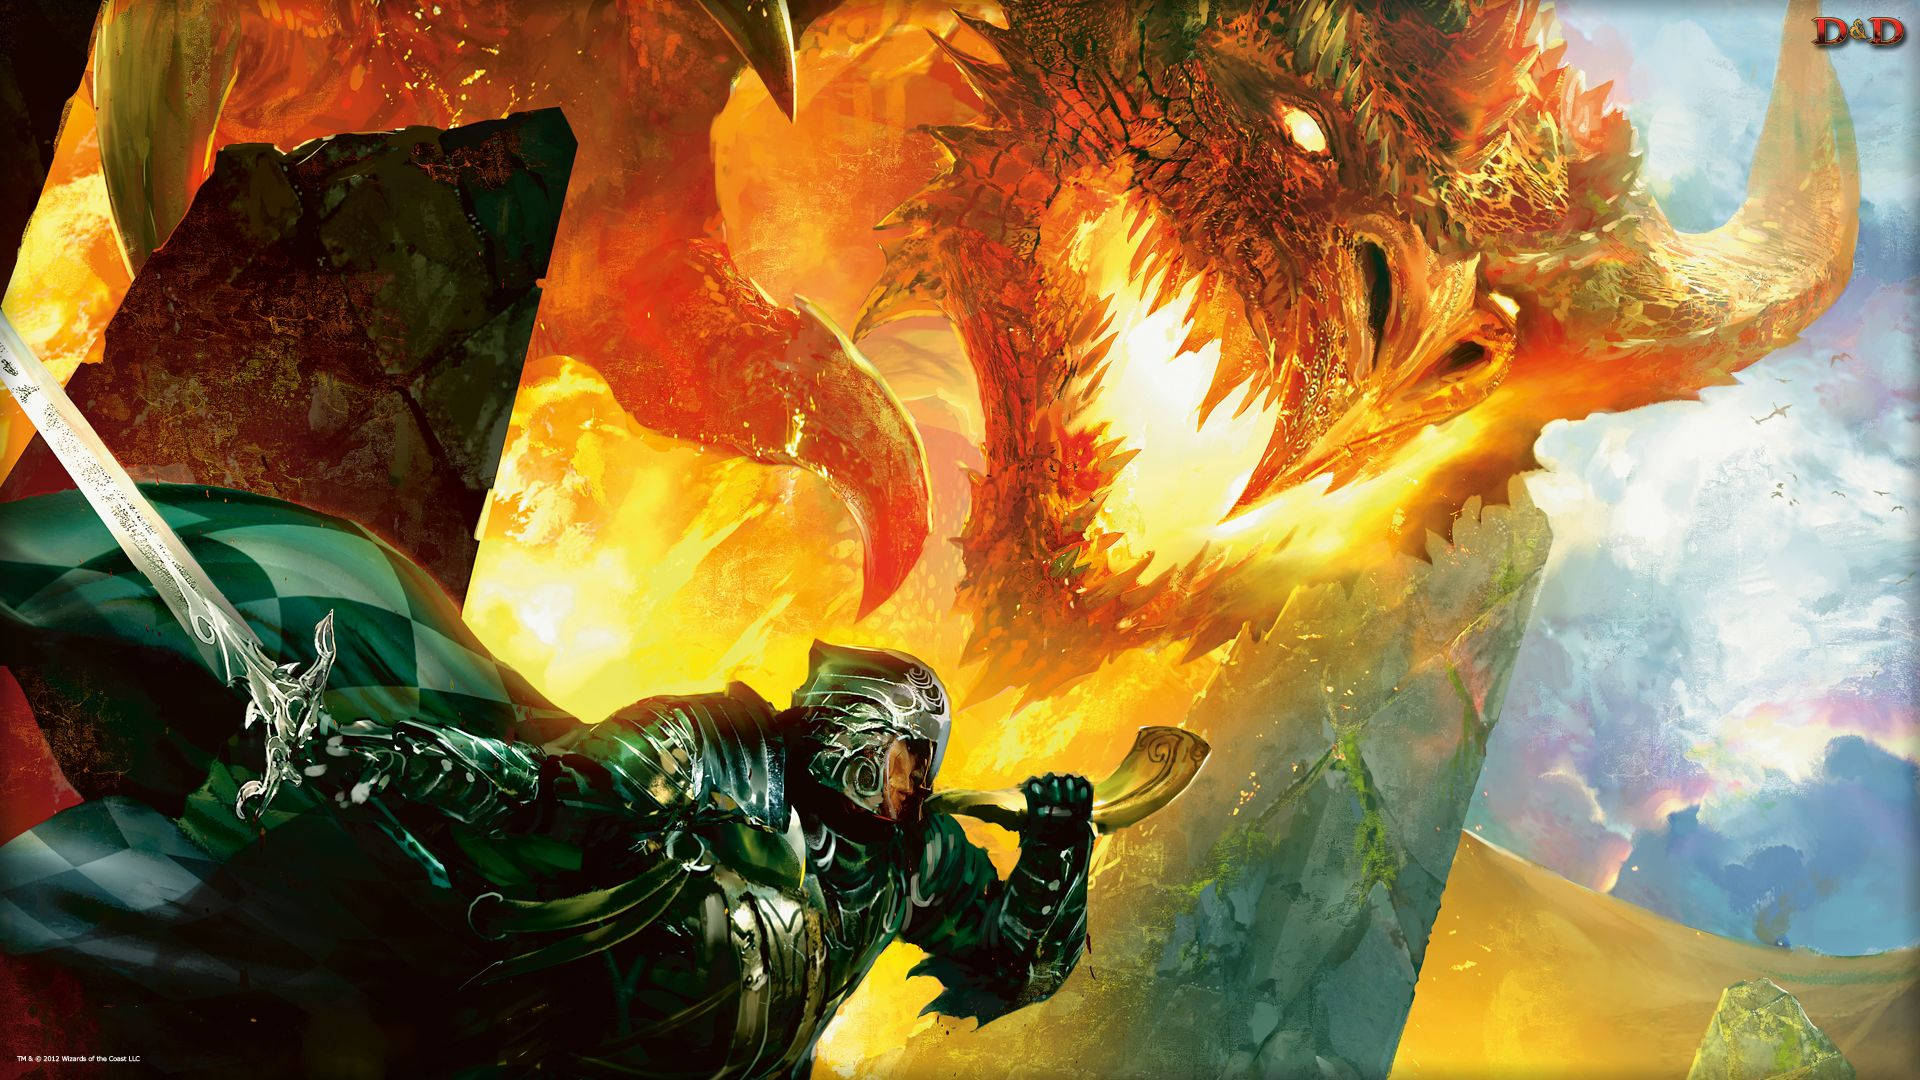 A ferocious fire dragon attacks a group of adventurers in a DnD campaign Wallpaper